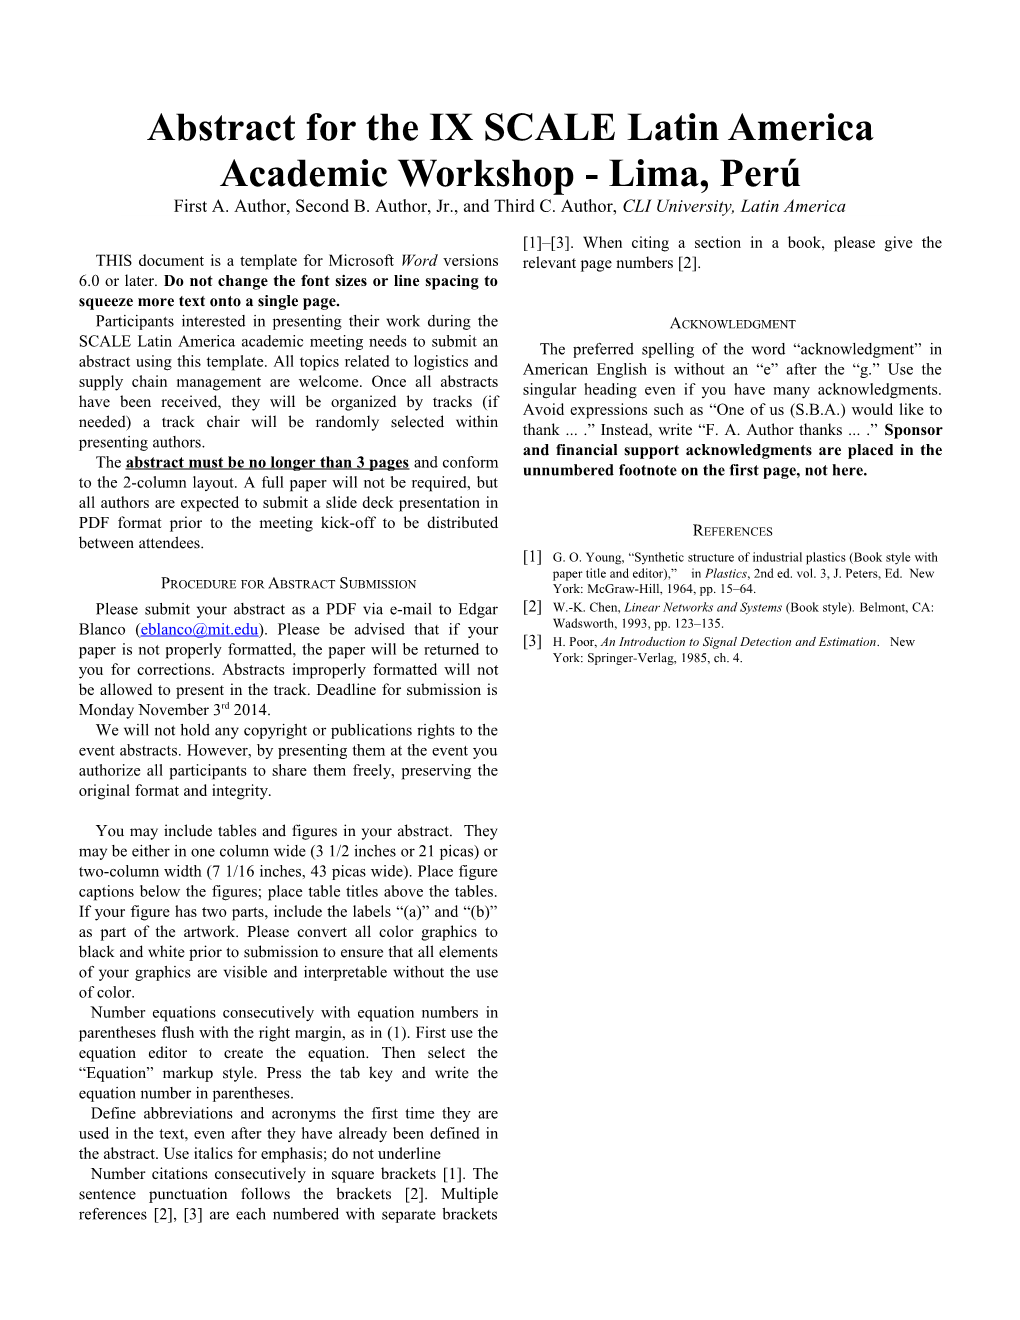 Abstract for the IXSCALE Latin America Academic Workshop-Lima, Perú